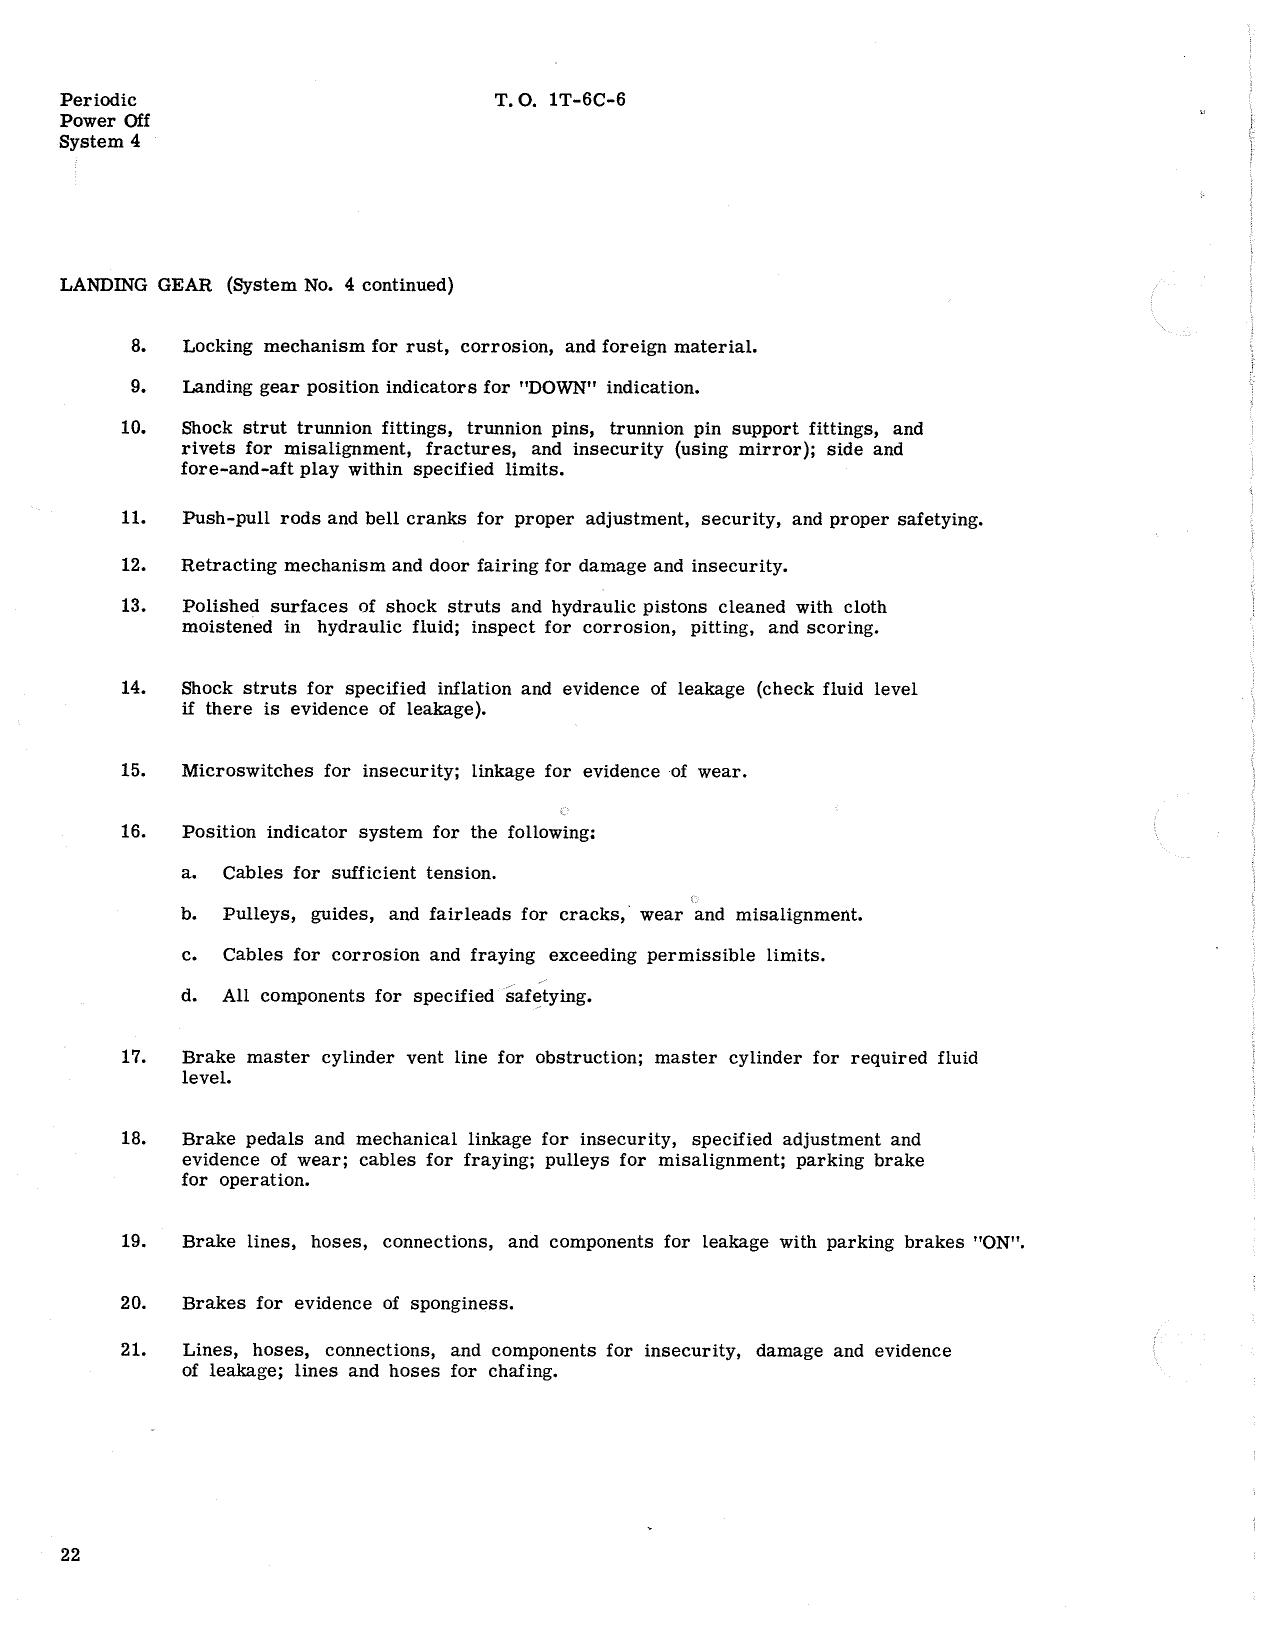 Sample page 84 from AirCorps Library document: Inspection Requirements T-6